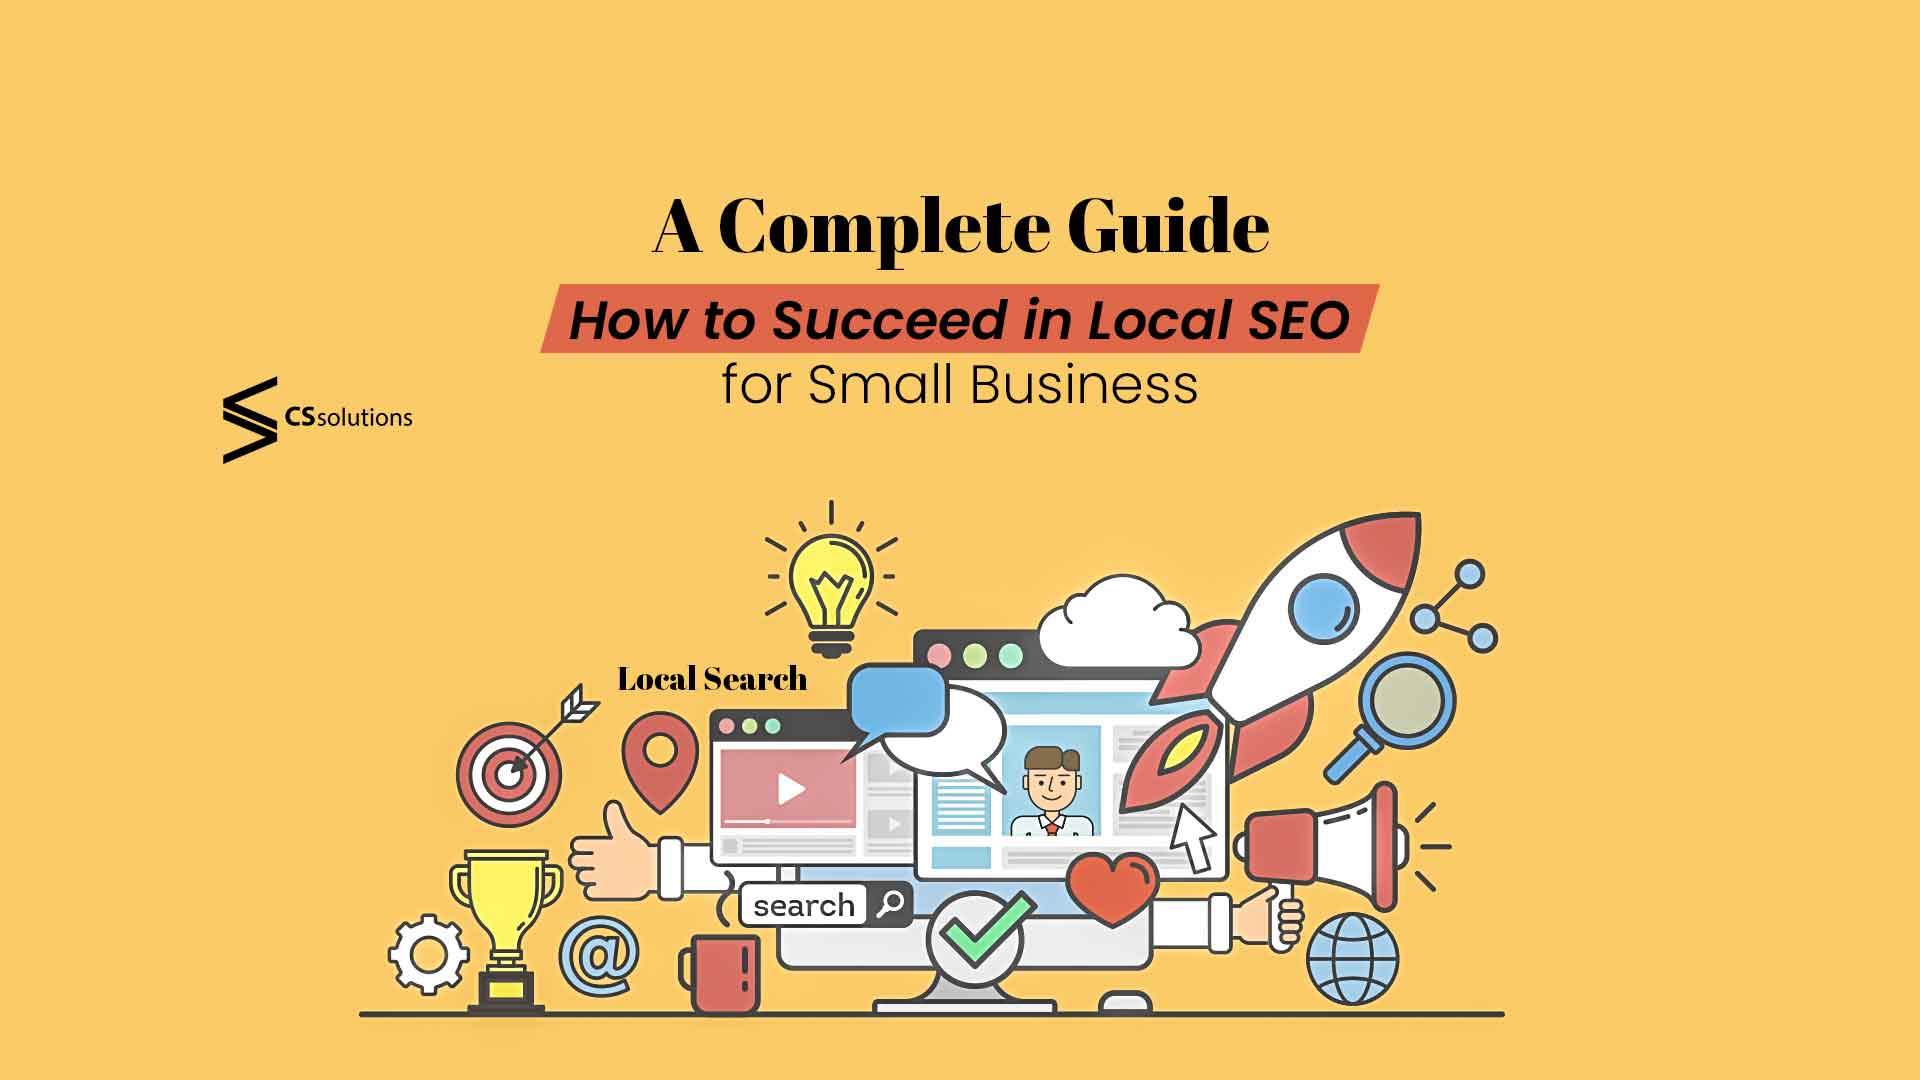 A Complete Guide: How to Succeed in Local SEO for Small Business